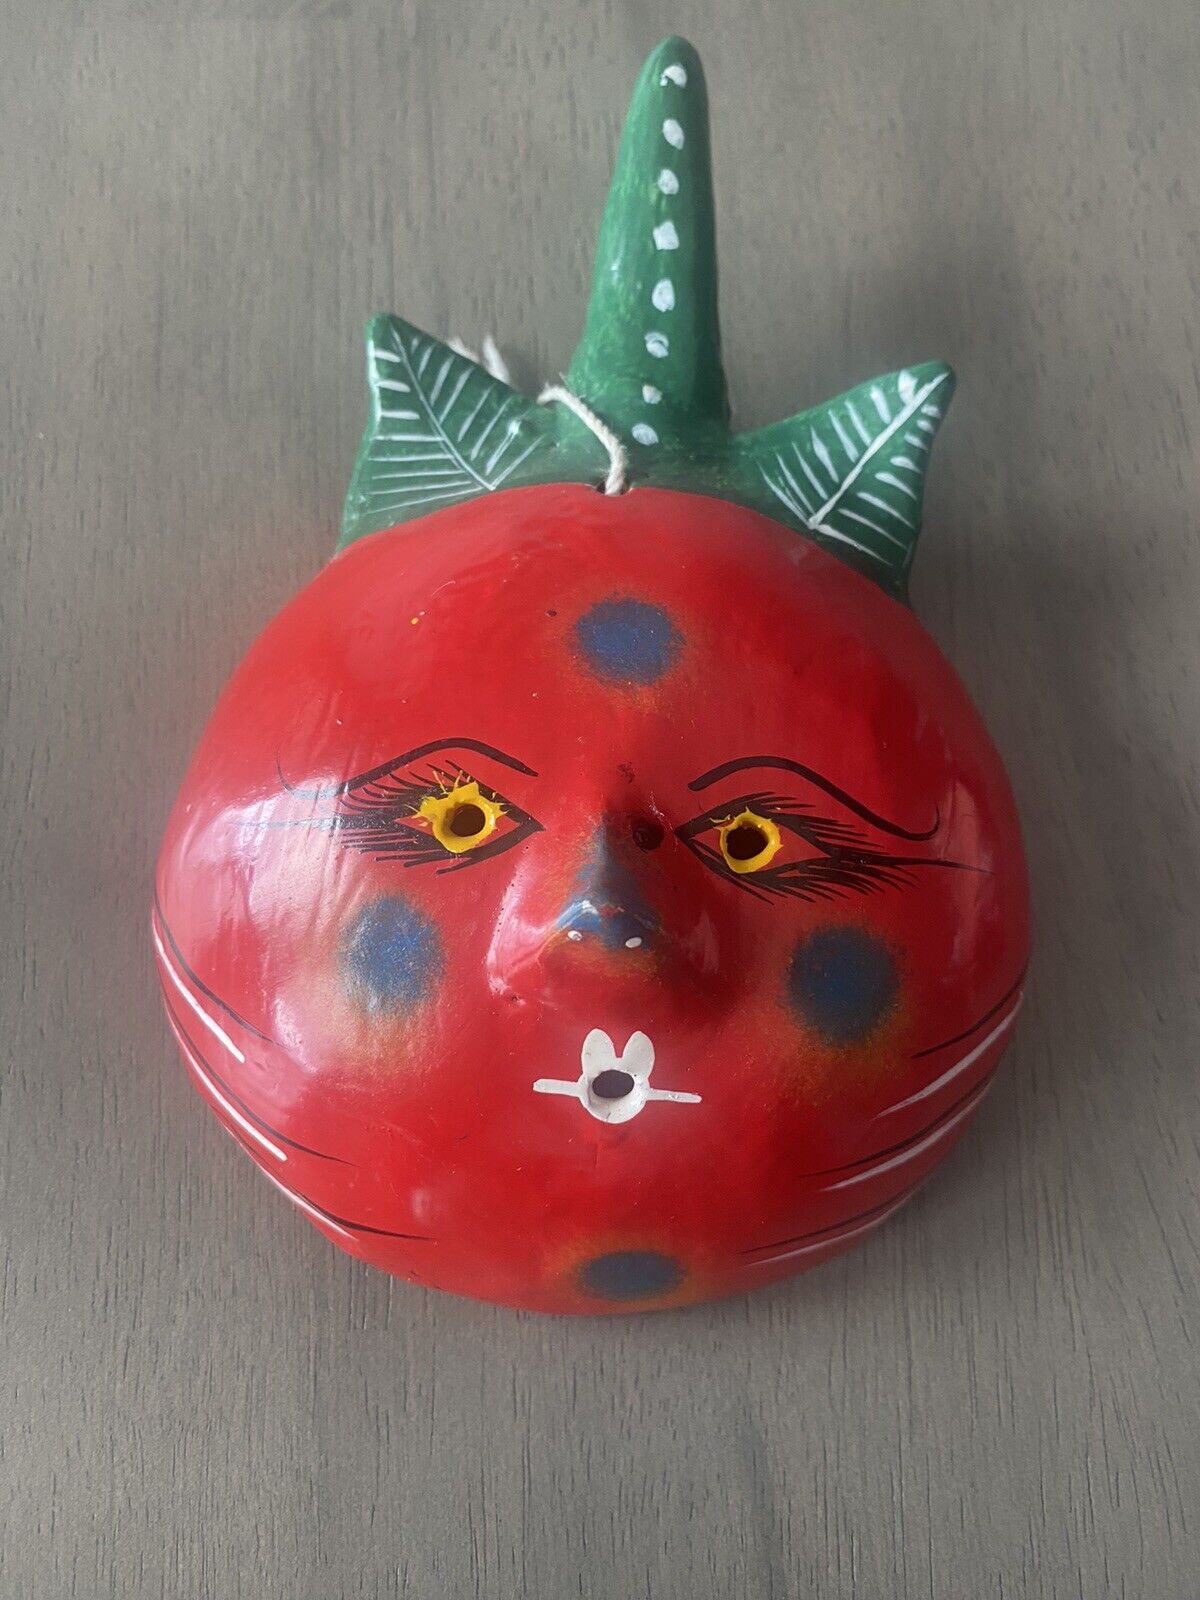 Vintage Mexican 7” Hand Painted Coconut Mask - Tomato - Red, Green, Yellow, Blue